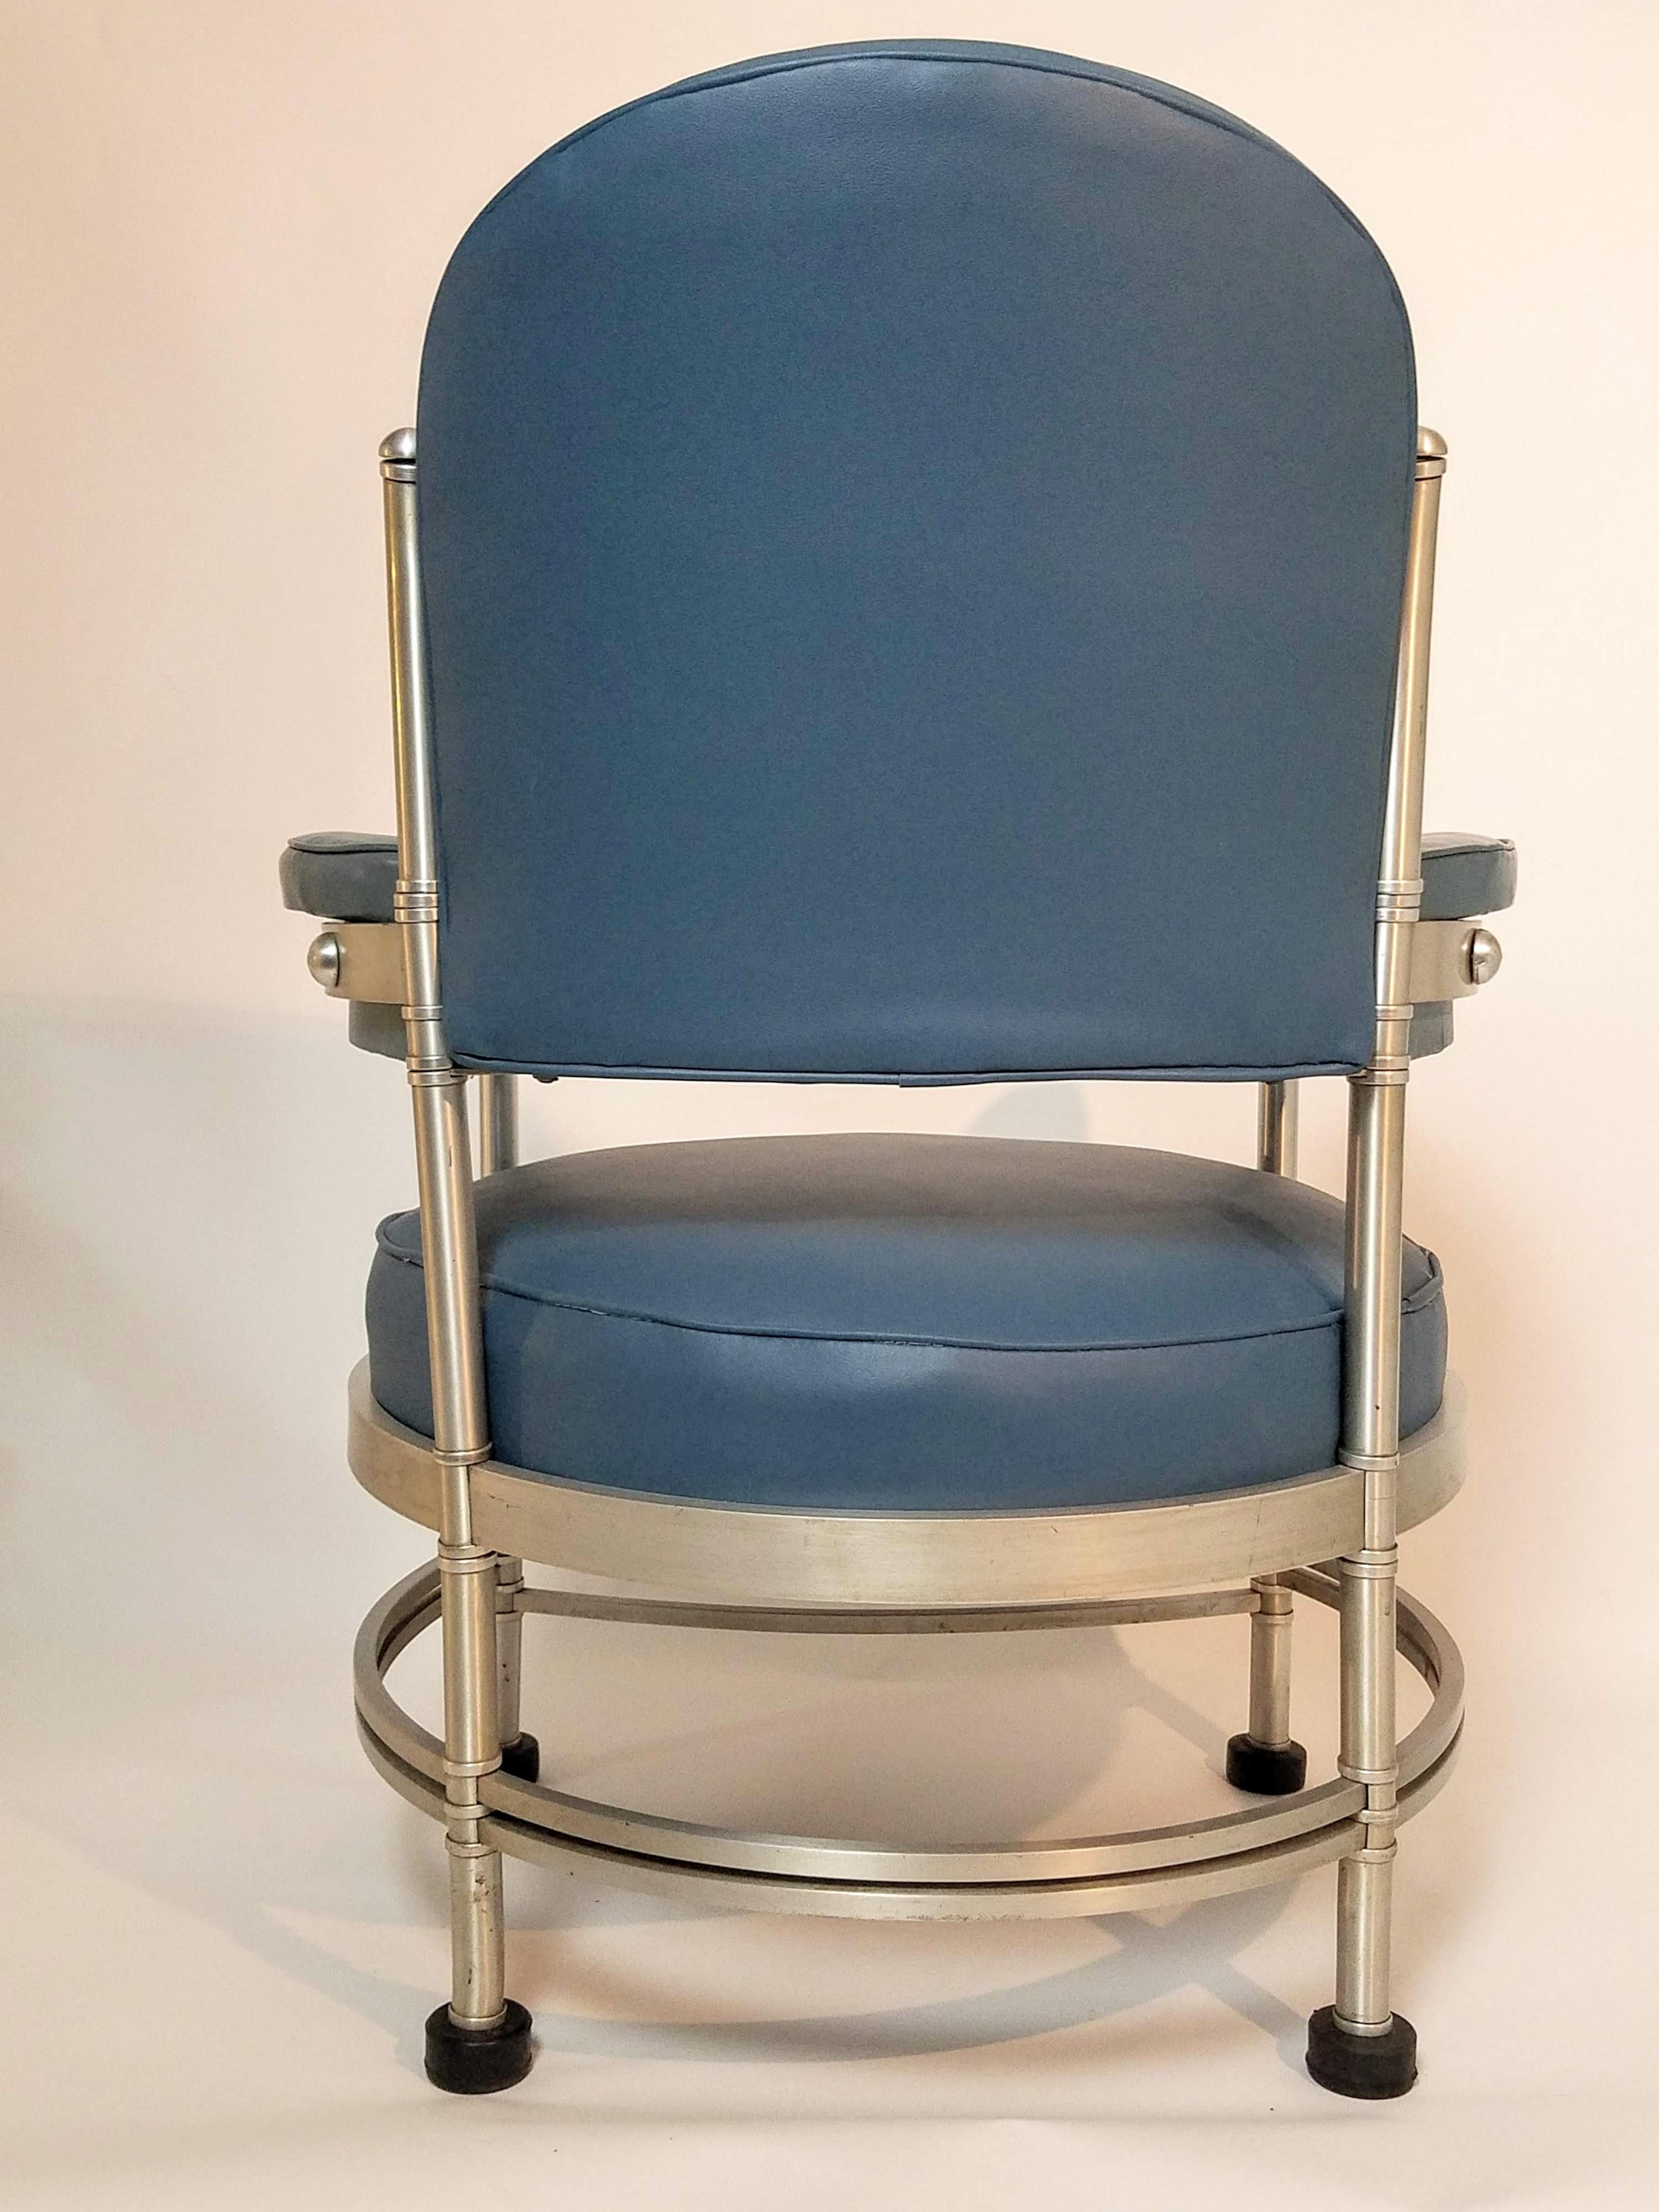 Anodized Warren McArthur Round Desk Chair Style No. 1083 AU Rome New York 1935/36 For Sale